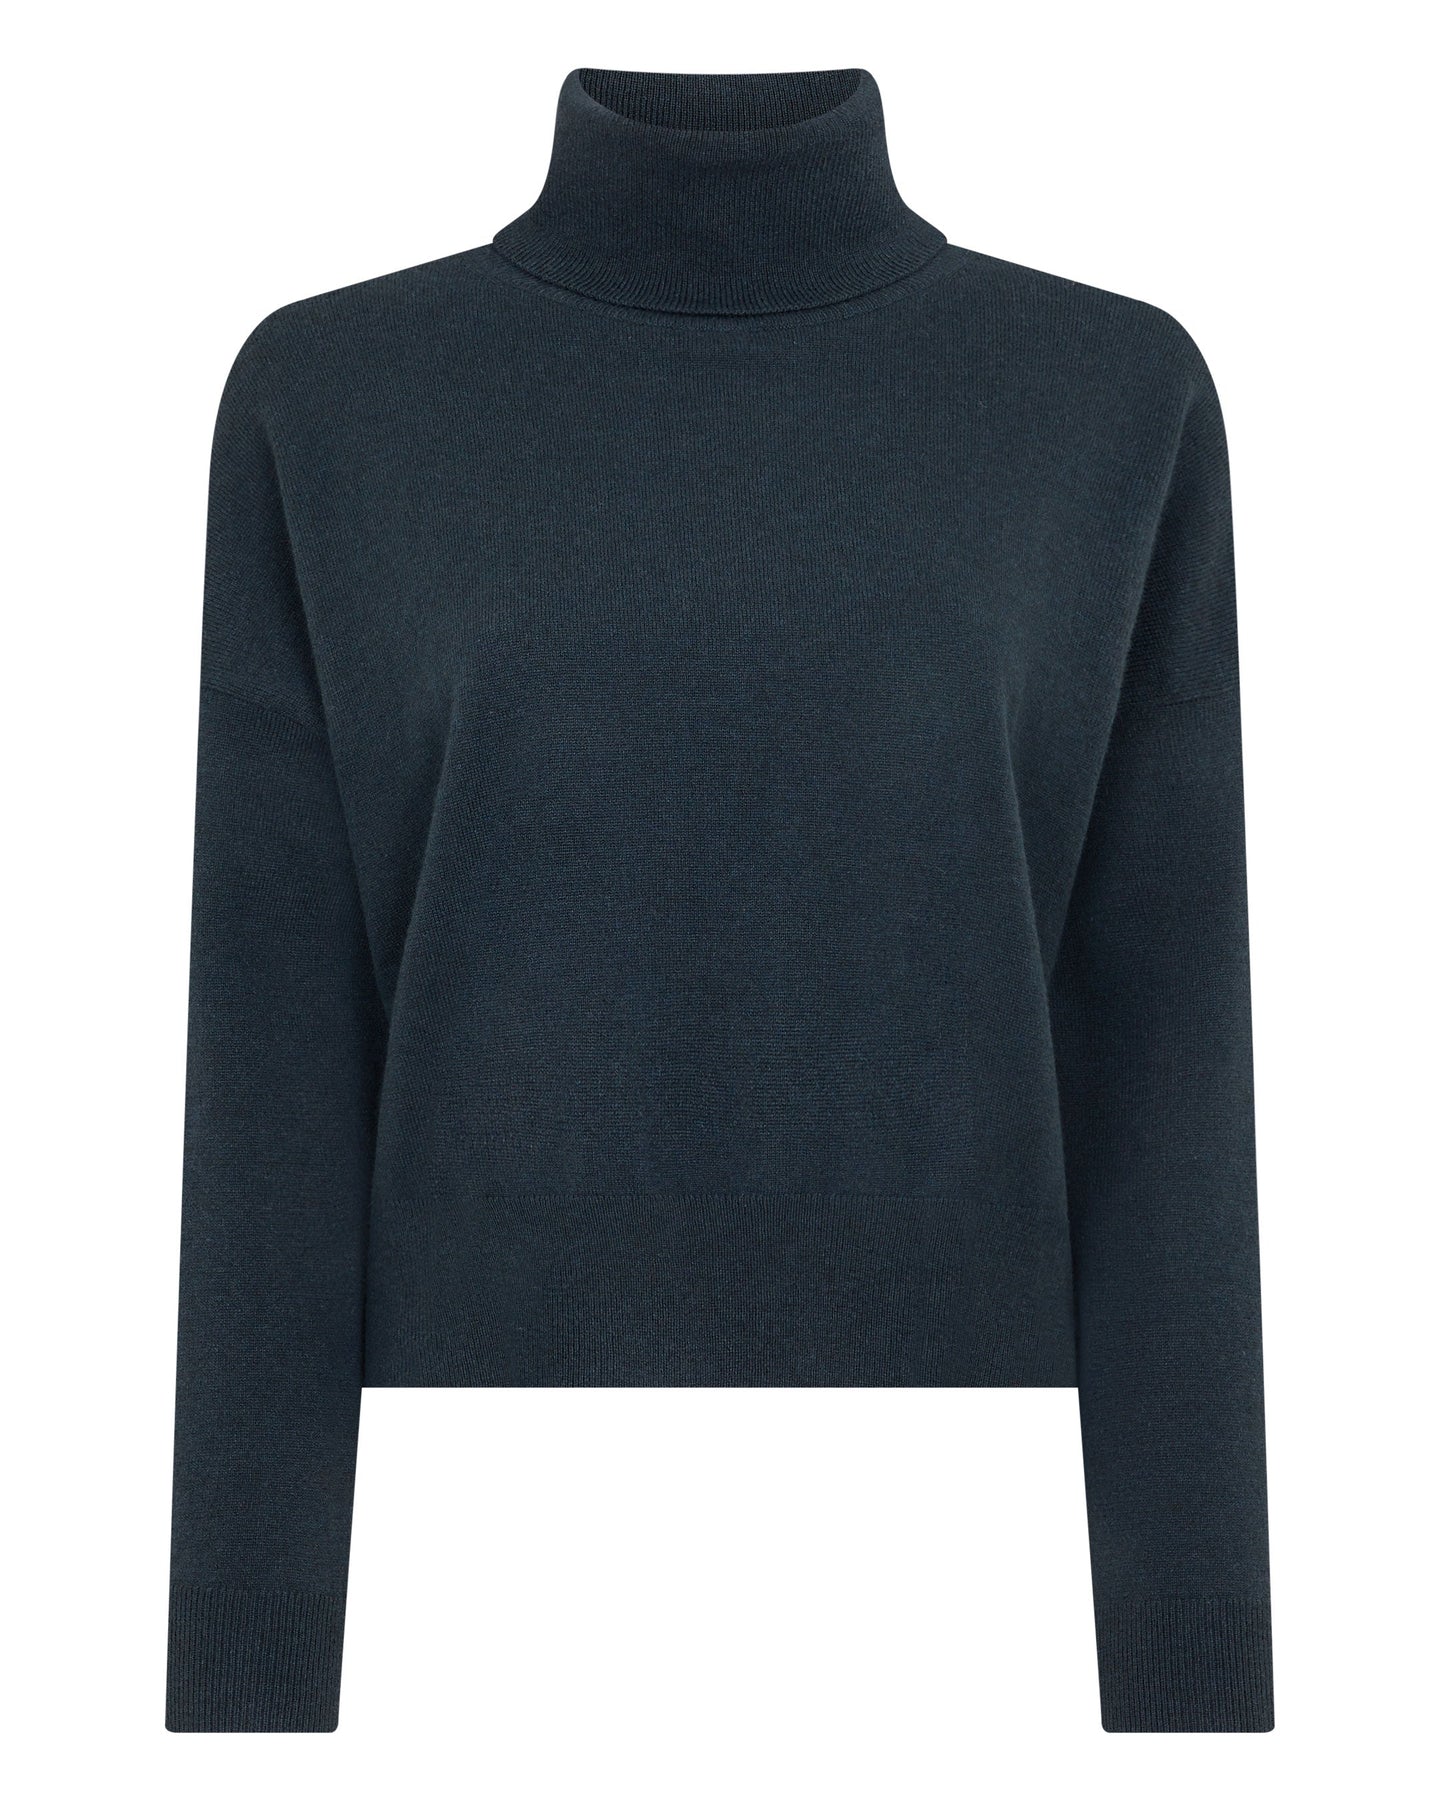 N.Peal Women's Relaxed Roll Neck Cashmere Jumper Grigio Blue